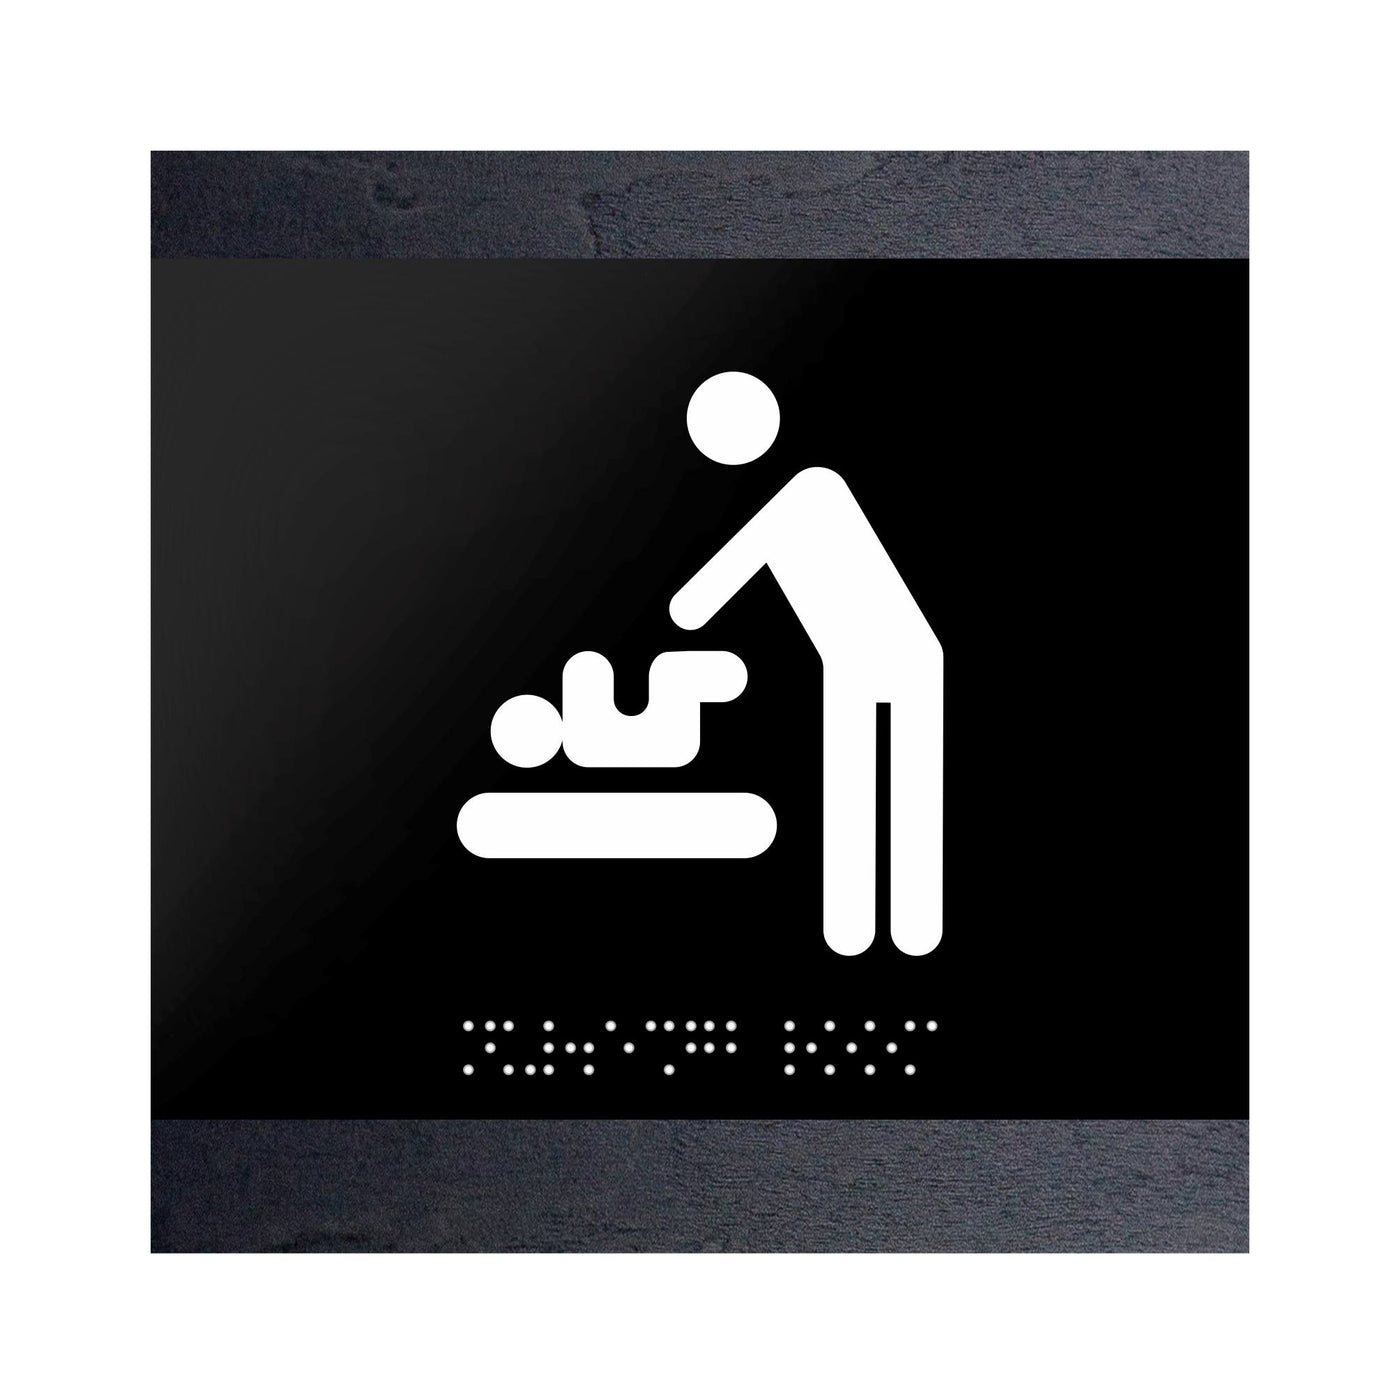 Wood Baby Change Room Sign for Mother - "Buro" Design